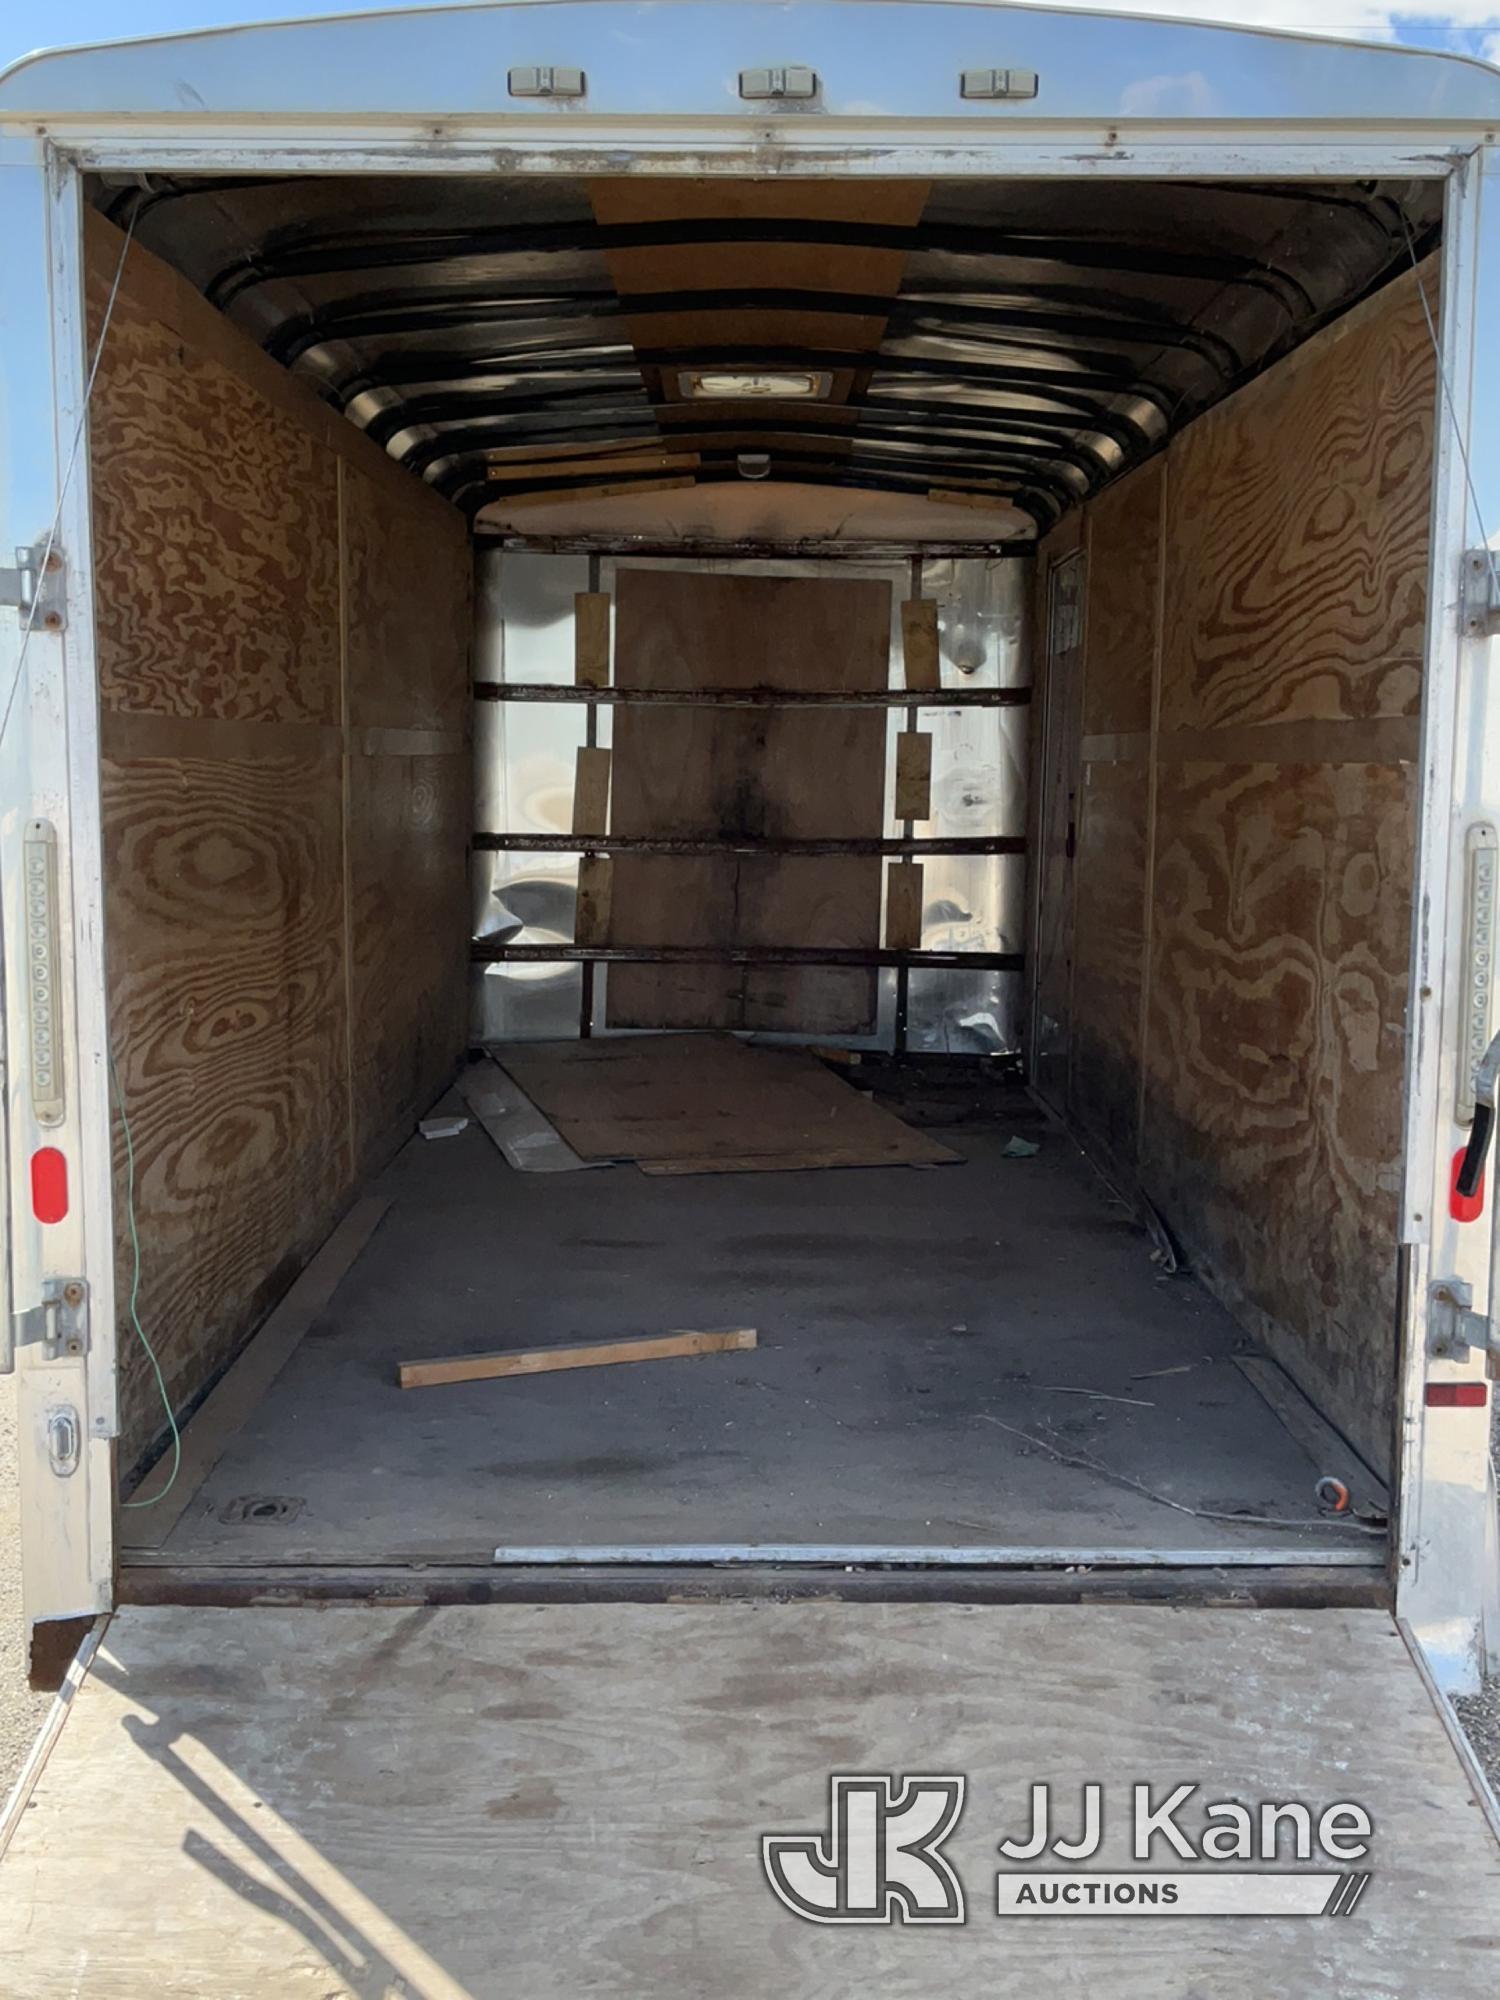 (South Beloit, IL) 2015 Forest River T/A Enclosed Trailer No Title) (Seller States: Body & Frame Bad